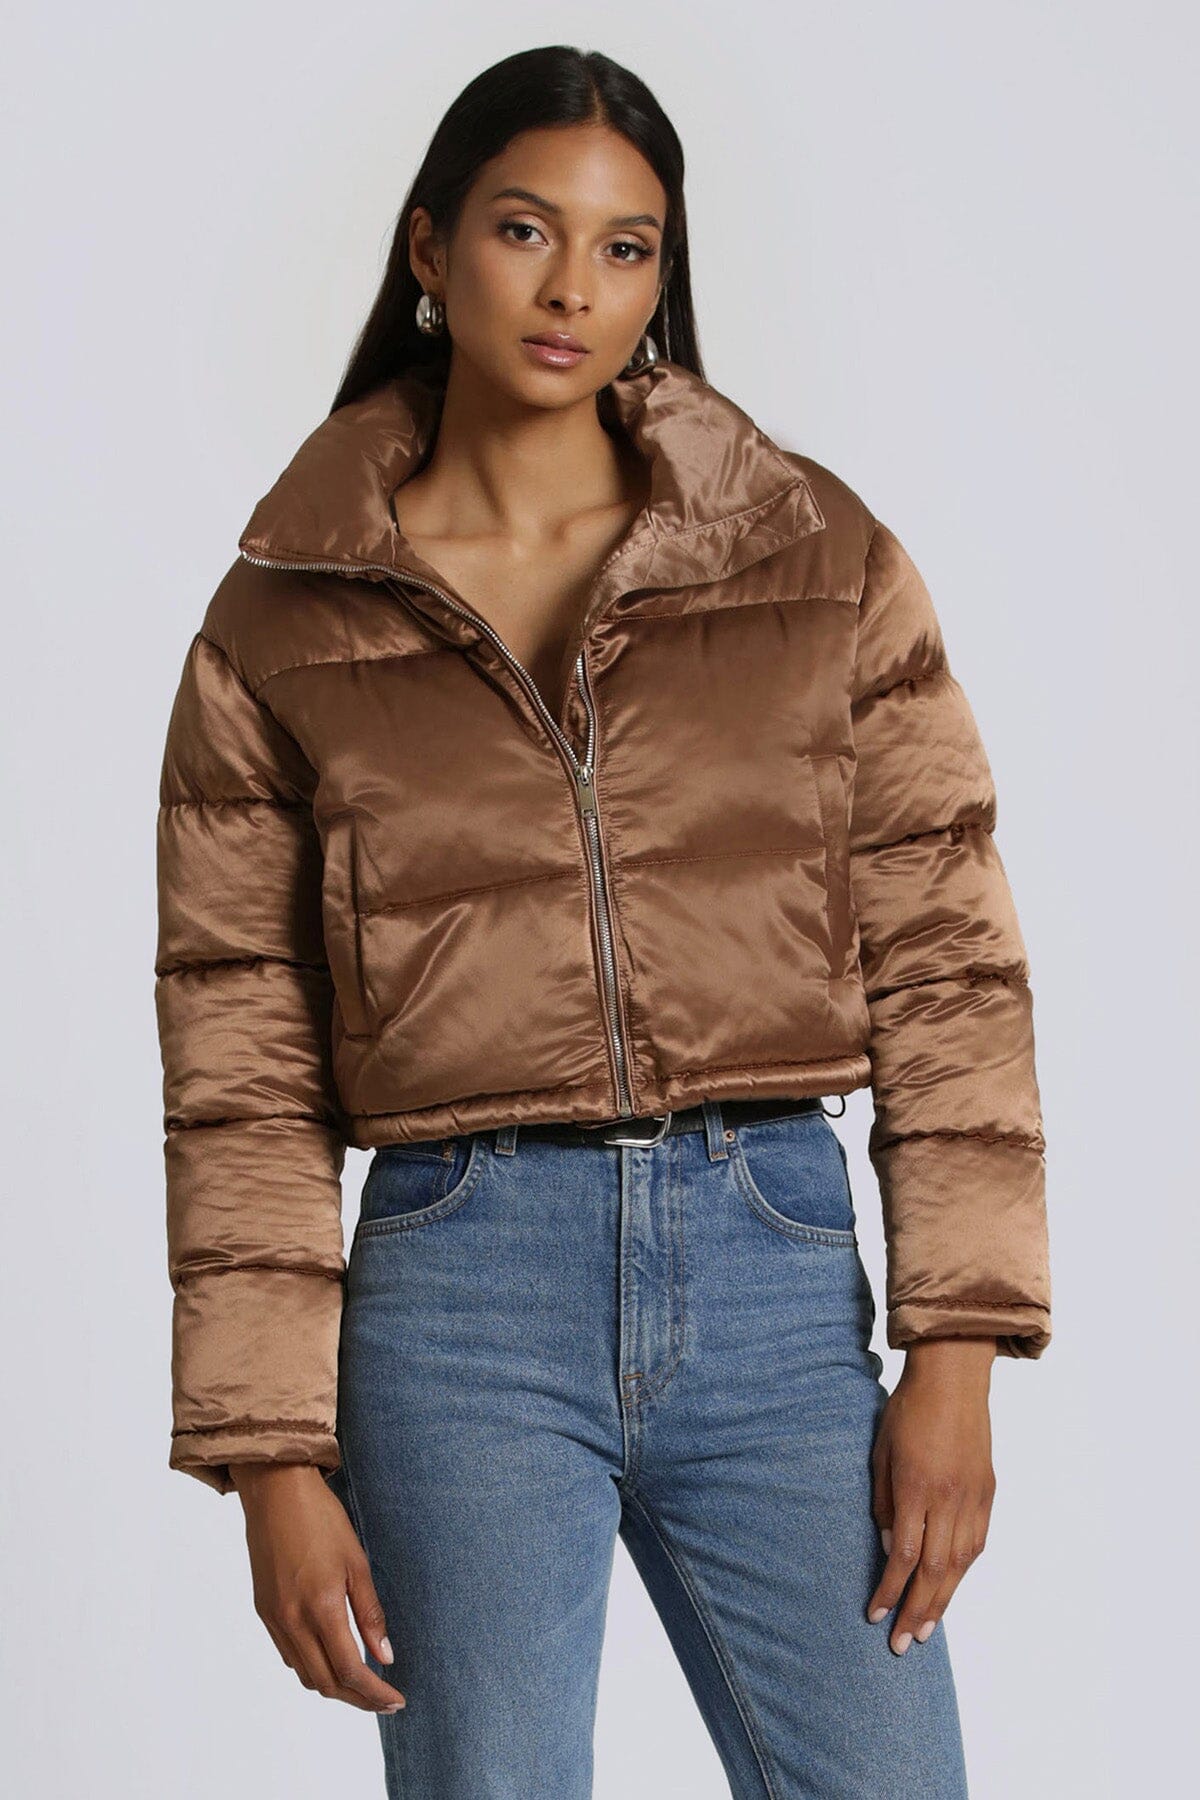 cropped satin puffer jacket coat copper brown - figure flattering cute office to date night outerwear for women